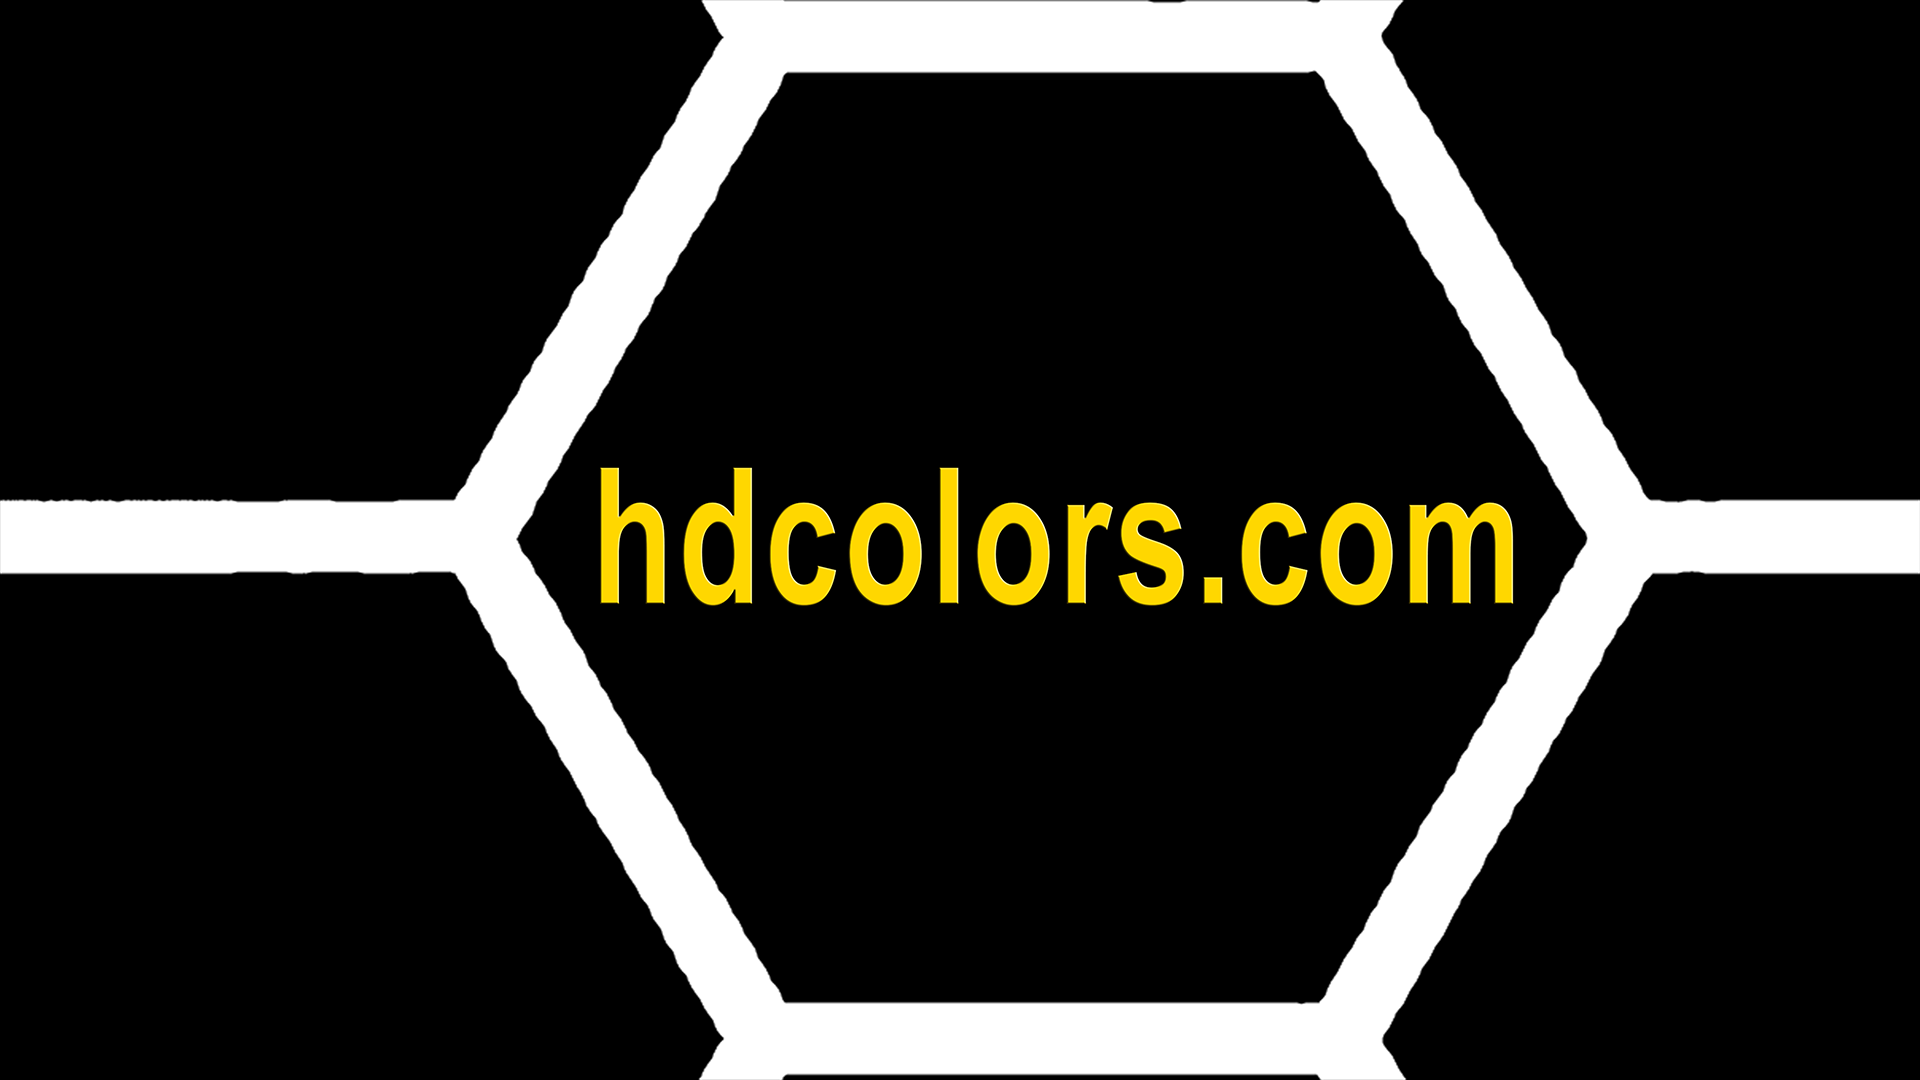 Single-Honeycomb-Background-with-HDCOLORS-logo.png